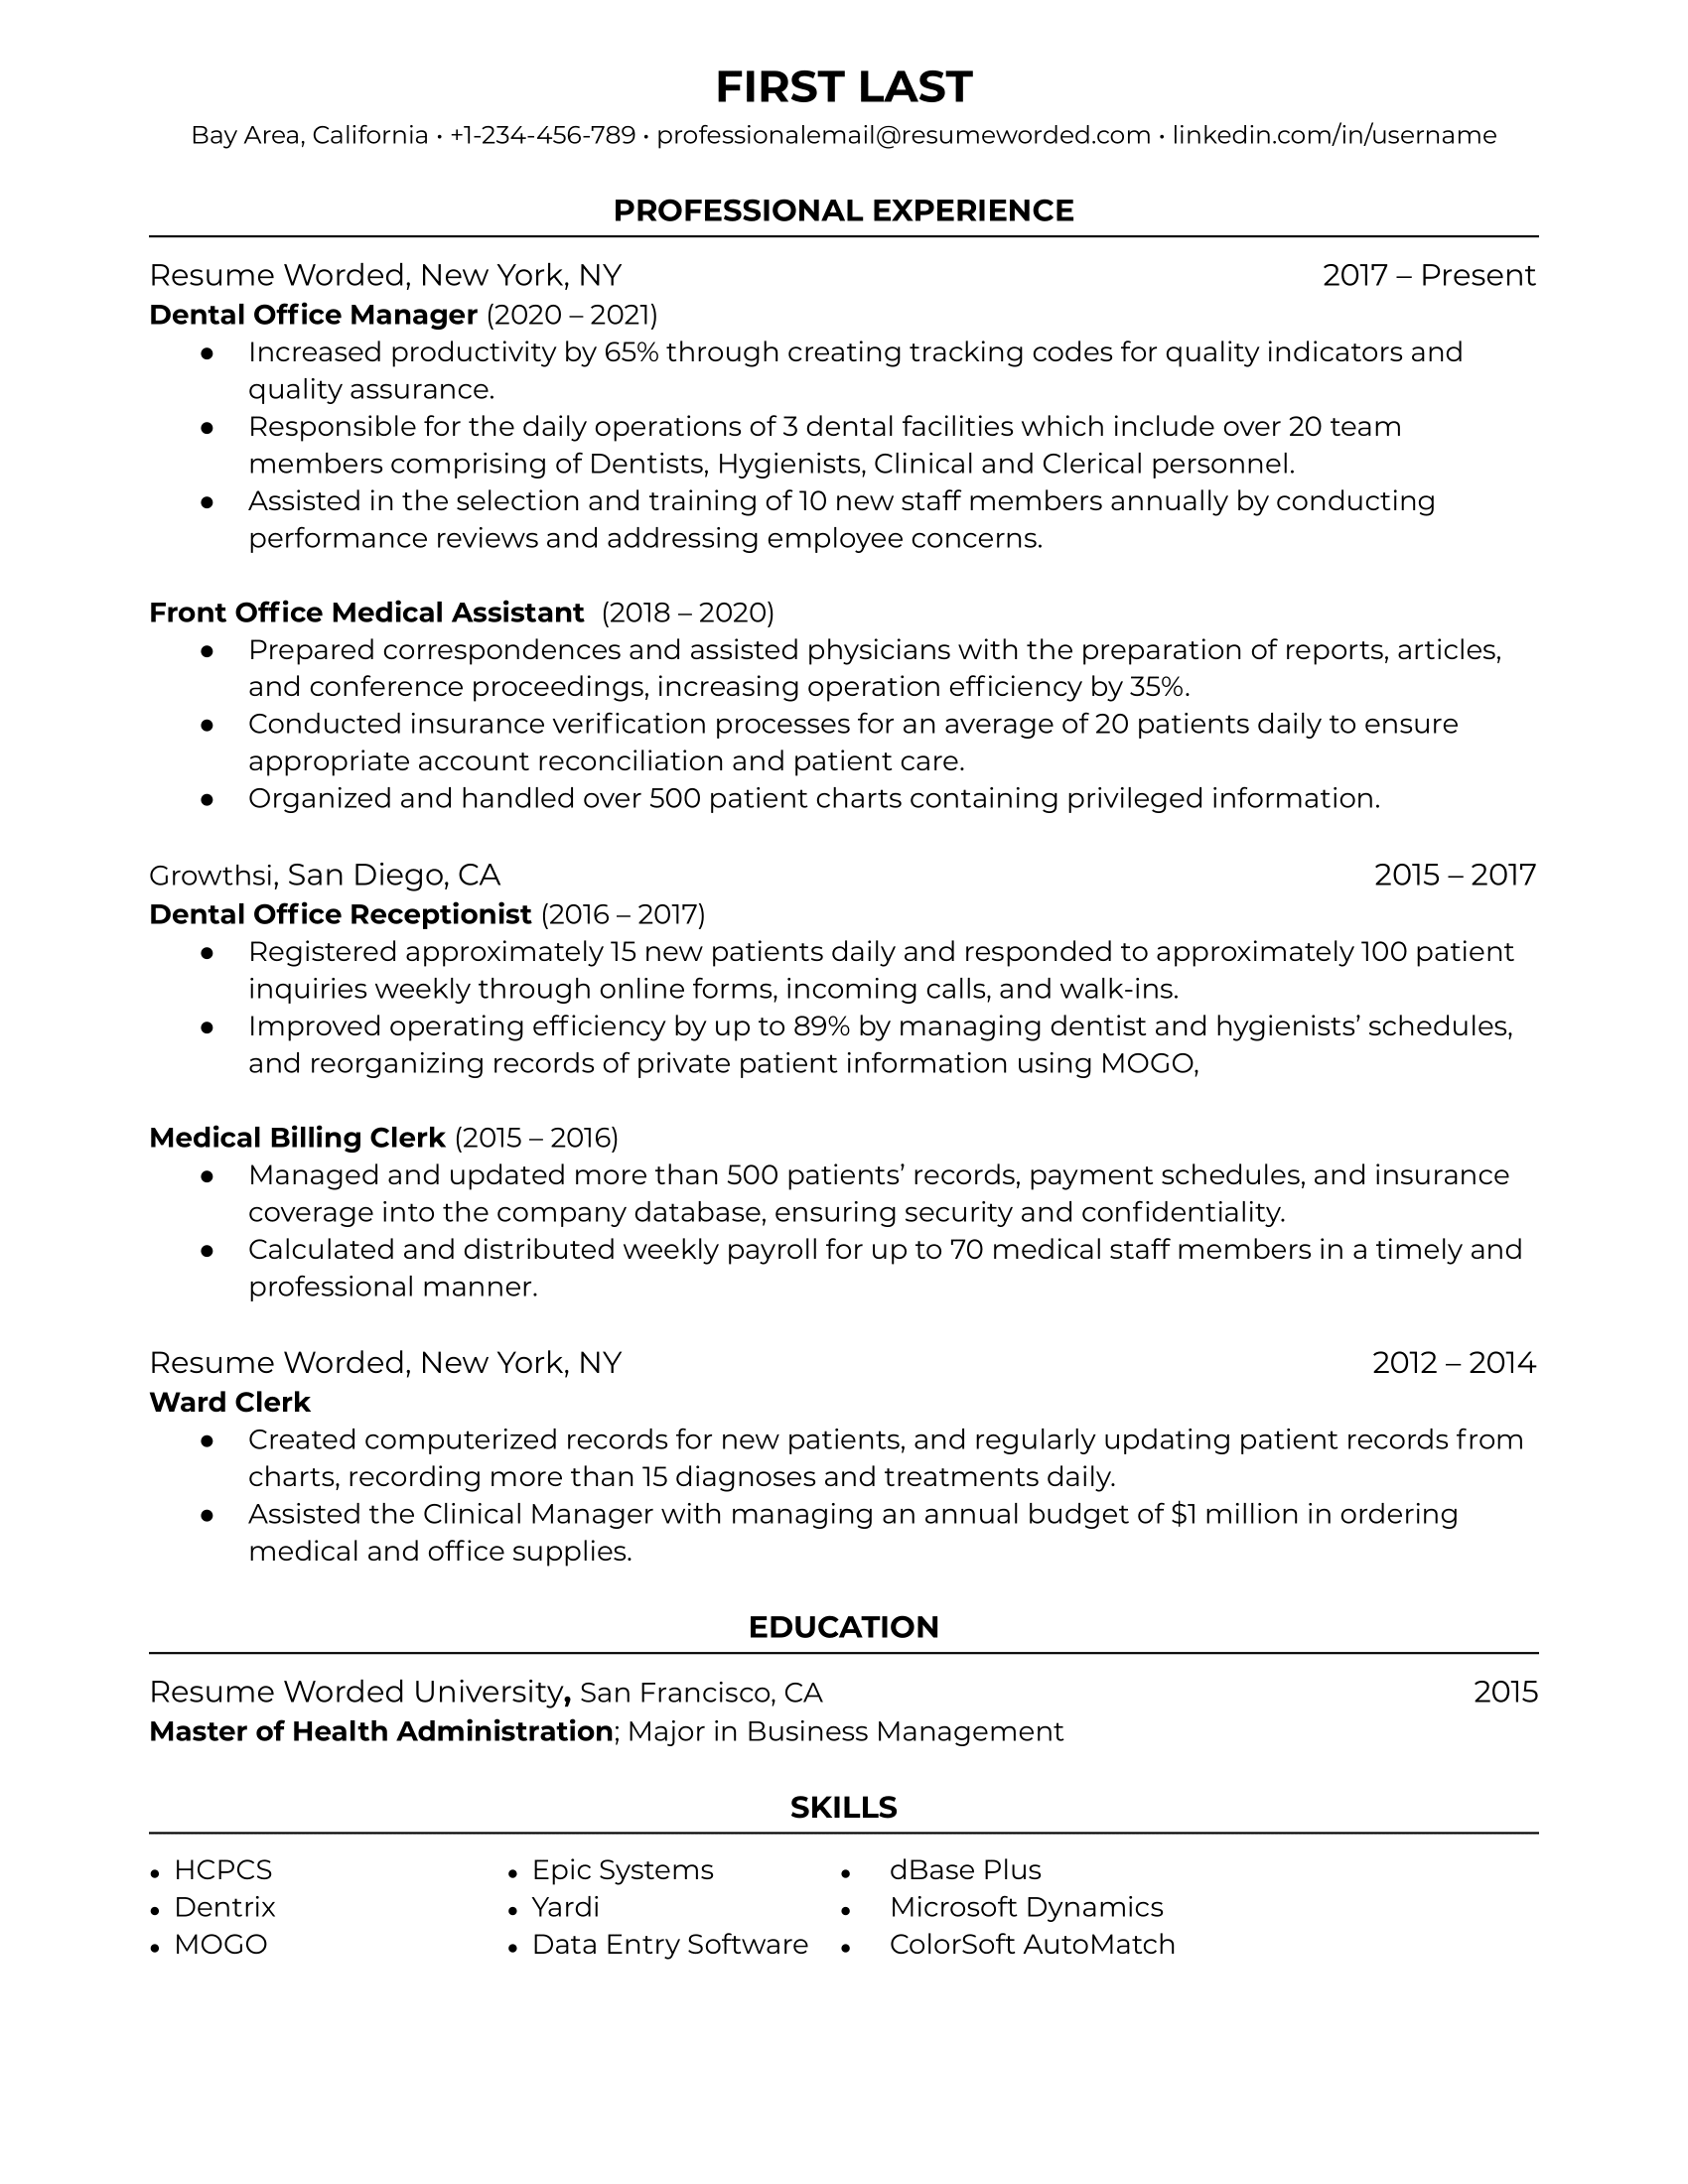 A well-organized CV for a Dental Office Manager position.